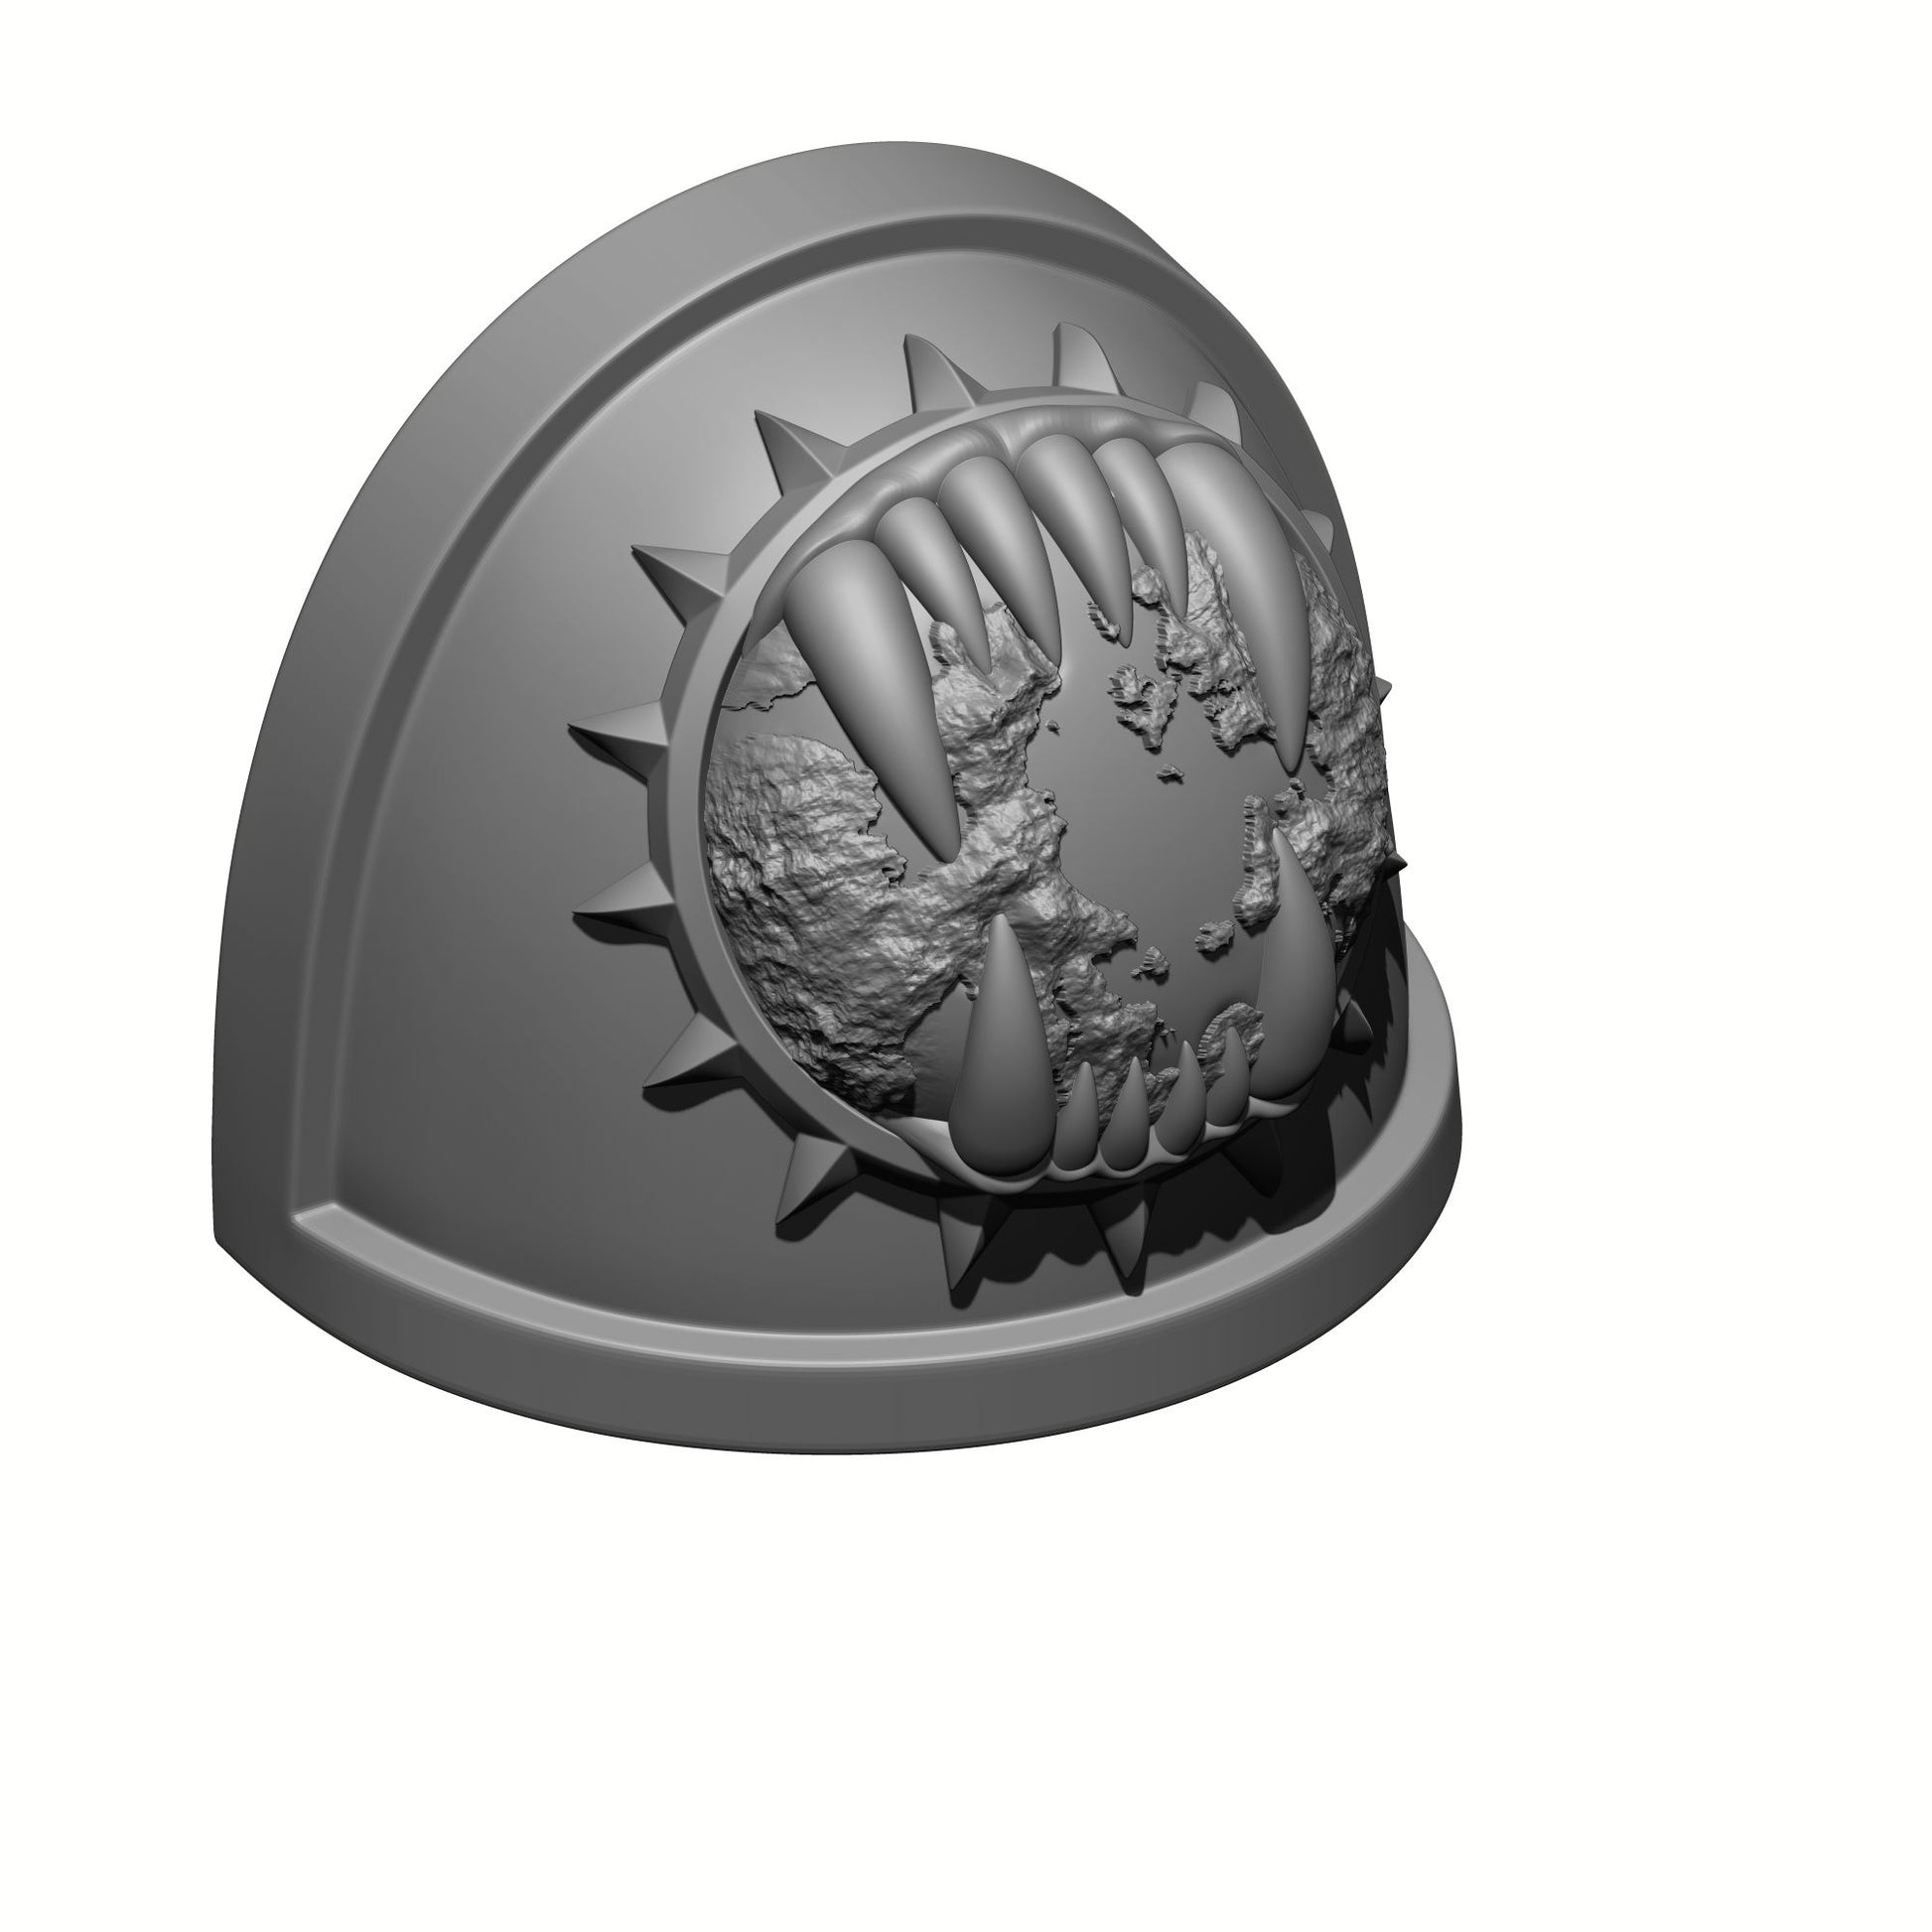 World Eaters Chapter MKVII Shoulder Pad Teeth Eating Planet is Compatible with McFarlane Space Marine Khornate Berzerkers Action Figures design by Fantasy World Games